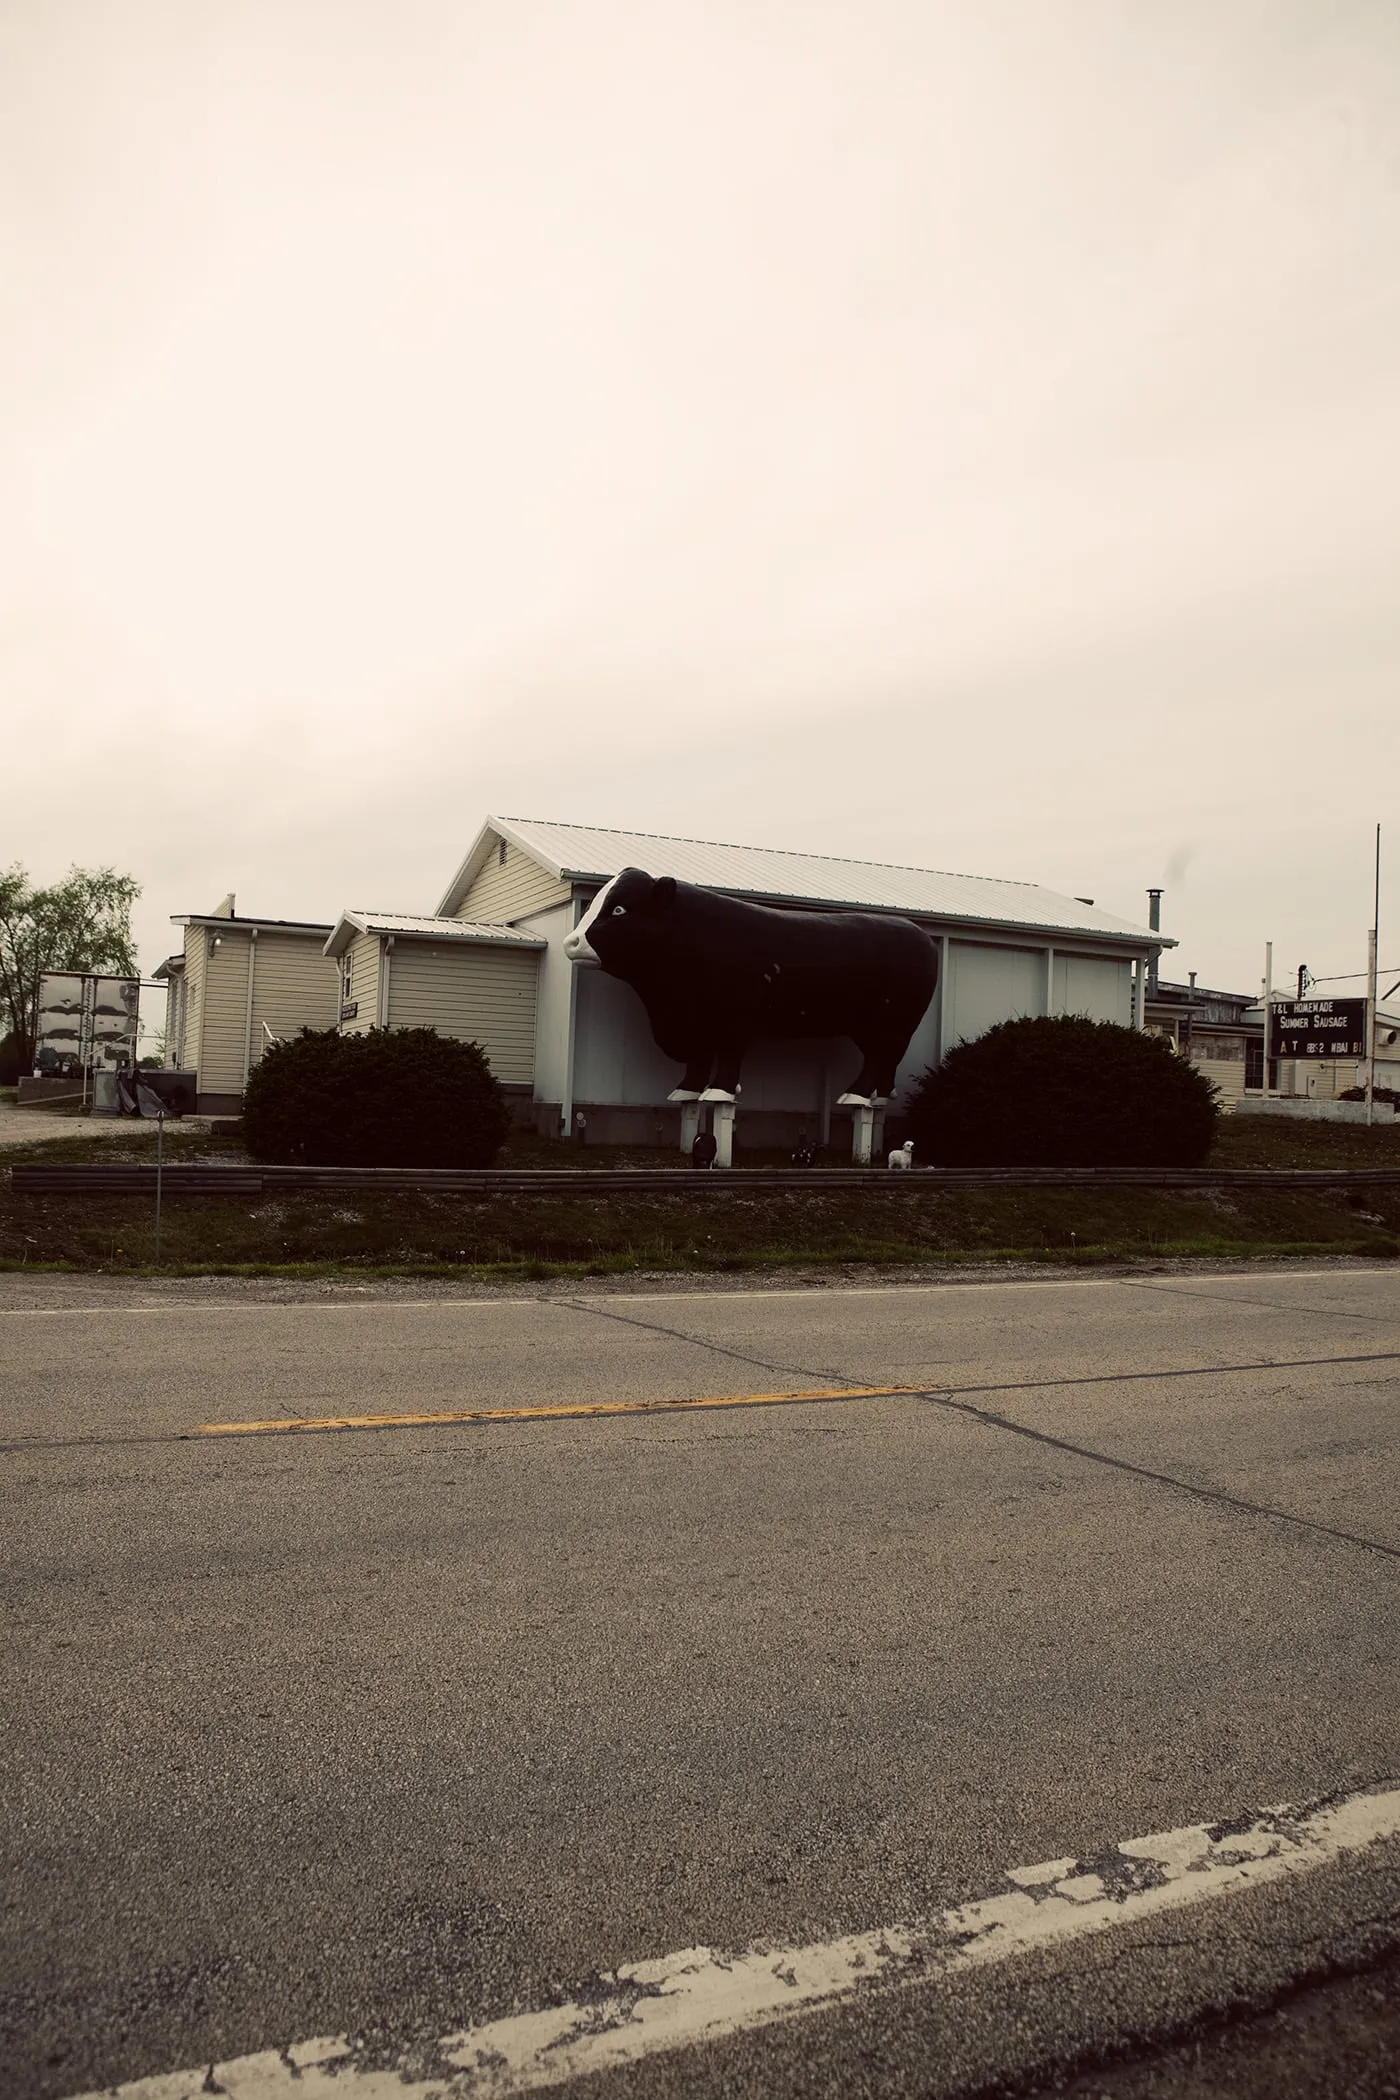 A giant bull roadside attraction in Stewardson, Illinois